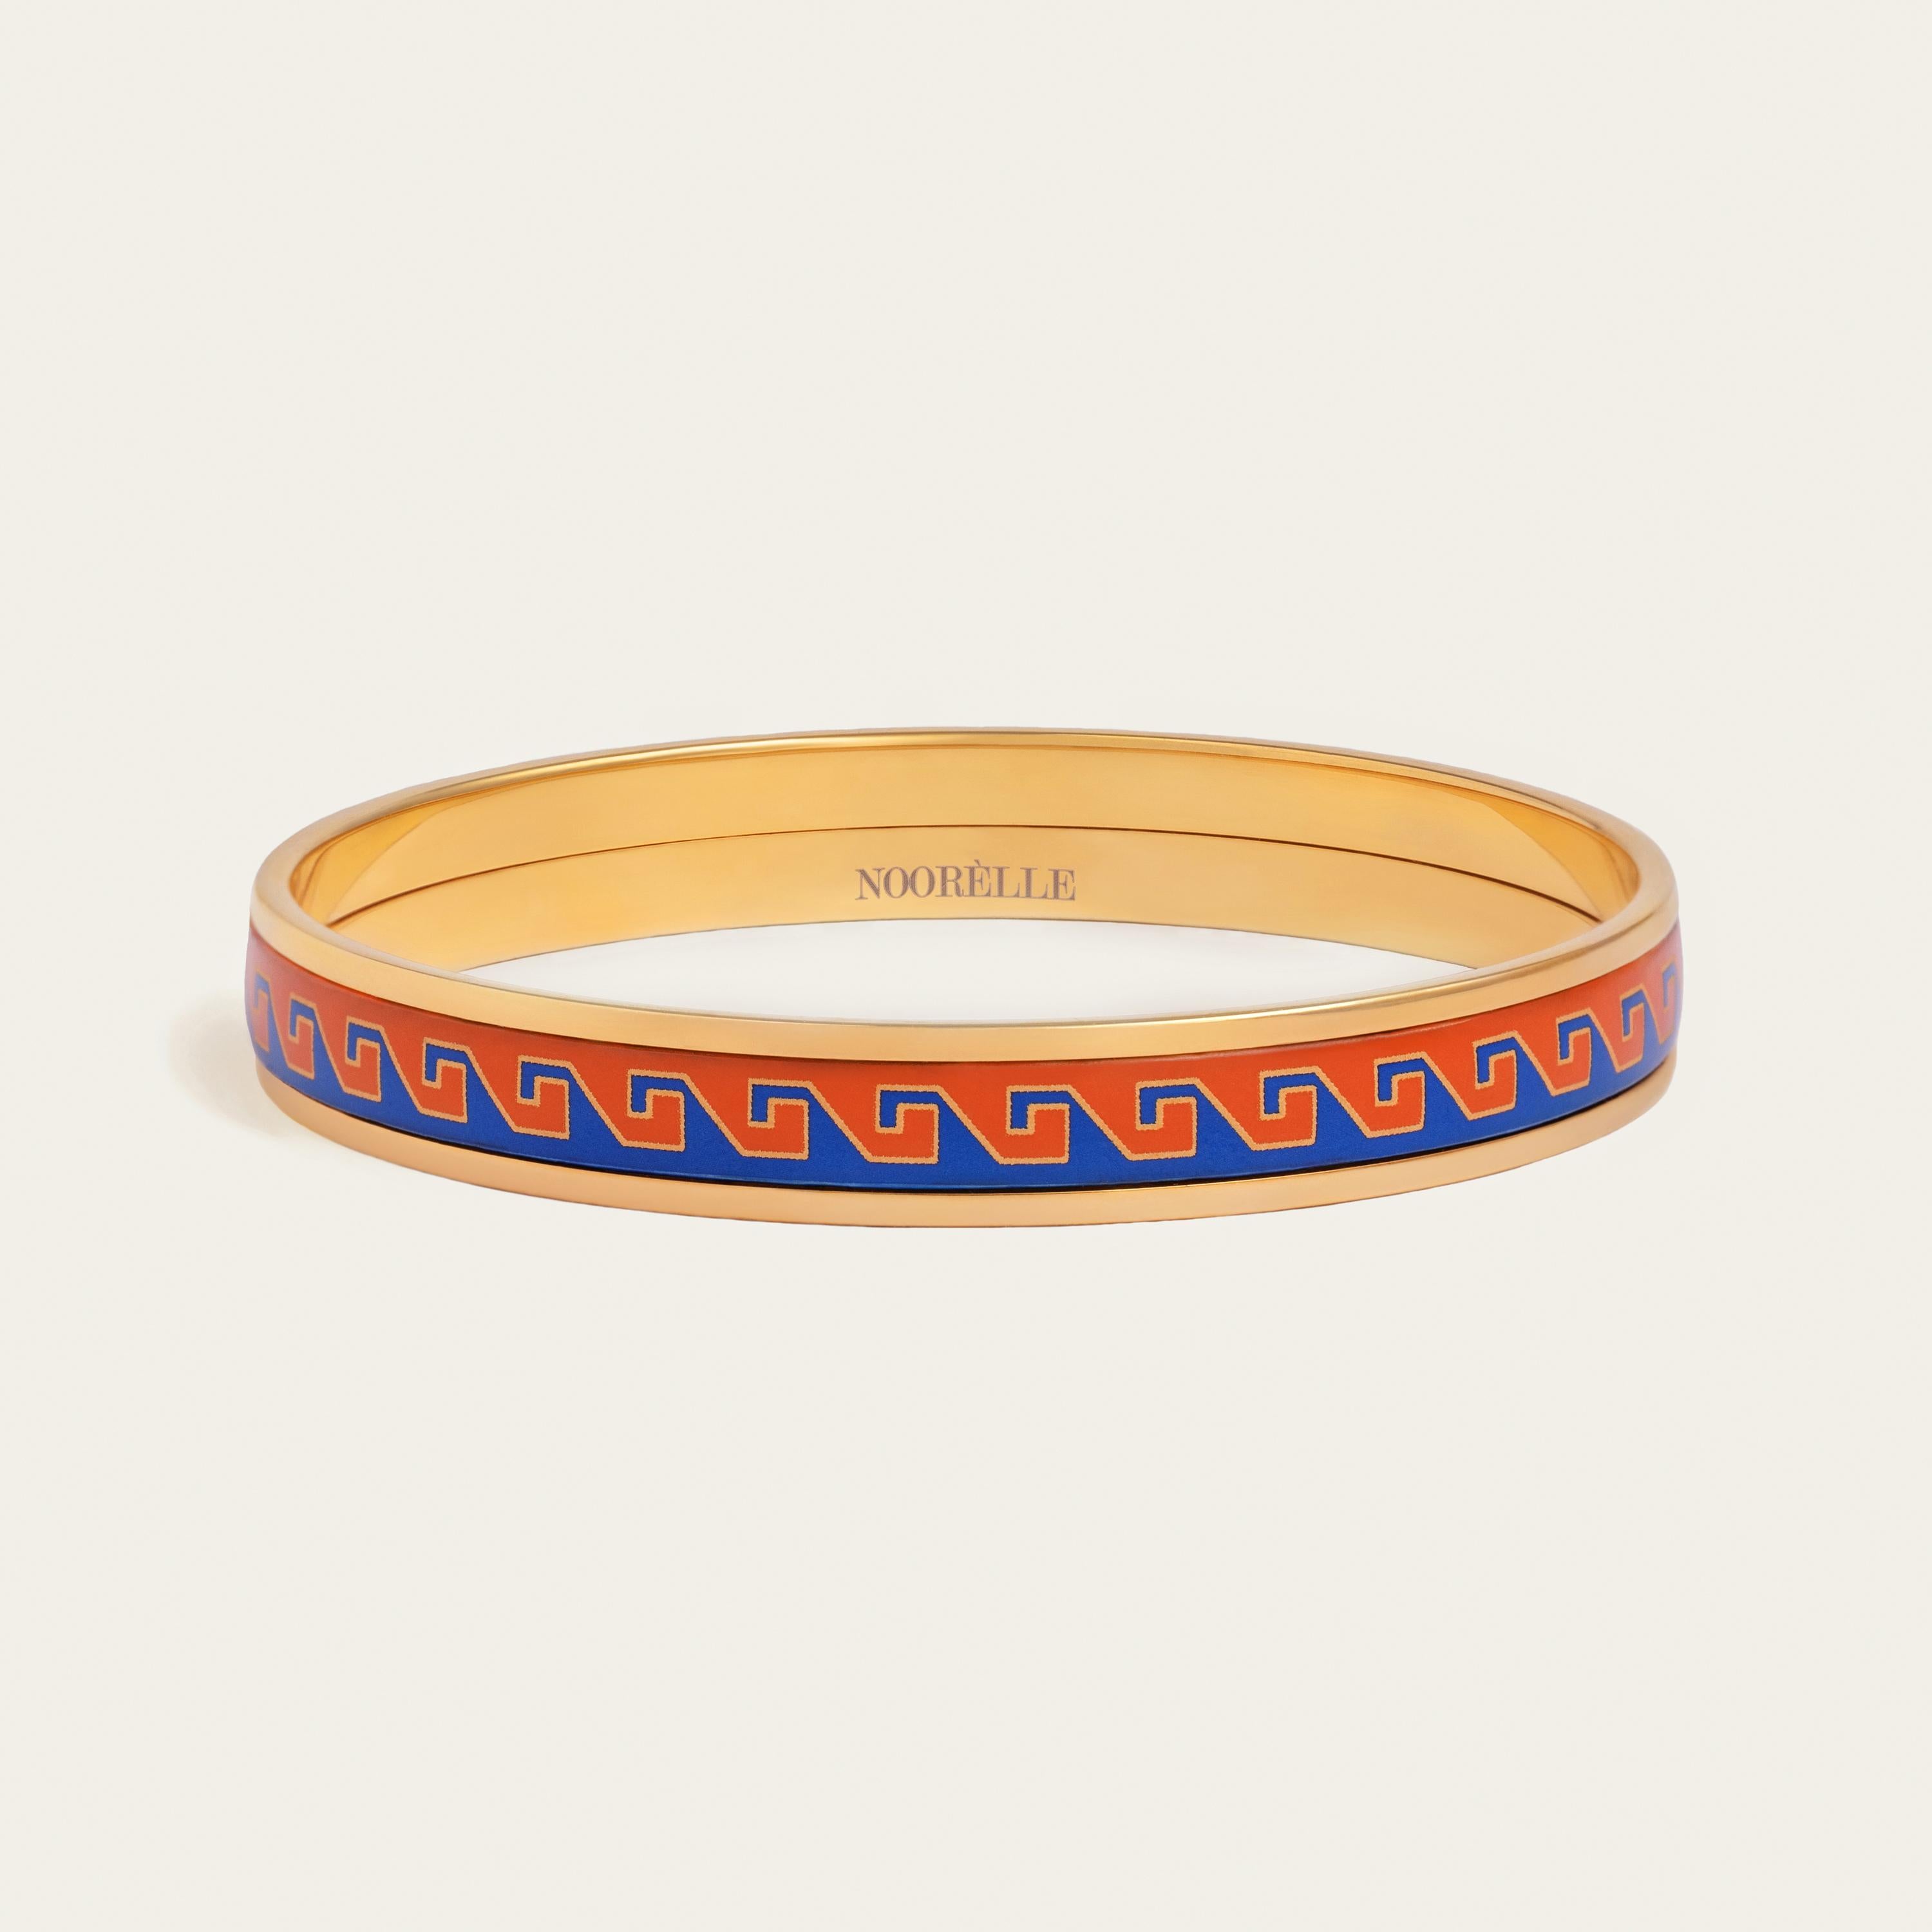 Elevate your style with our exquisite 18k gold-plated stainless steel bangle. Hand-painted with genuine fire enamel in vivid colors that will last forever, this luxurious piece is designed to make a statement. Hypoallergenic and made to last, wear